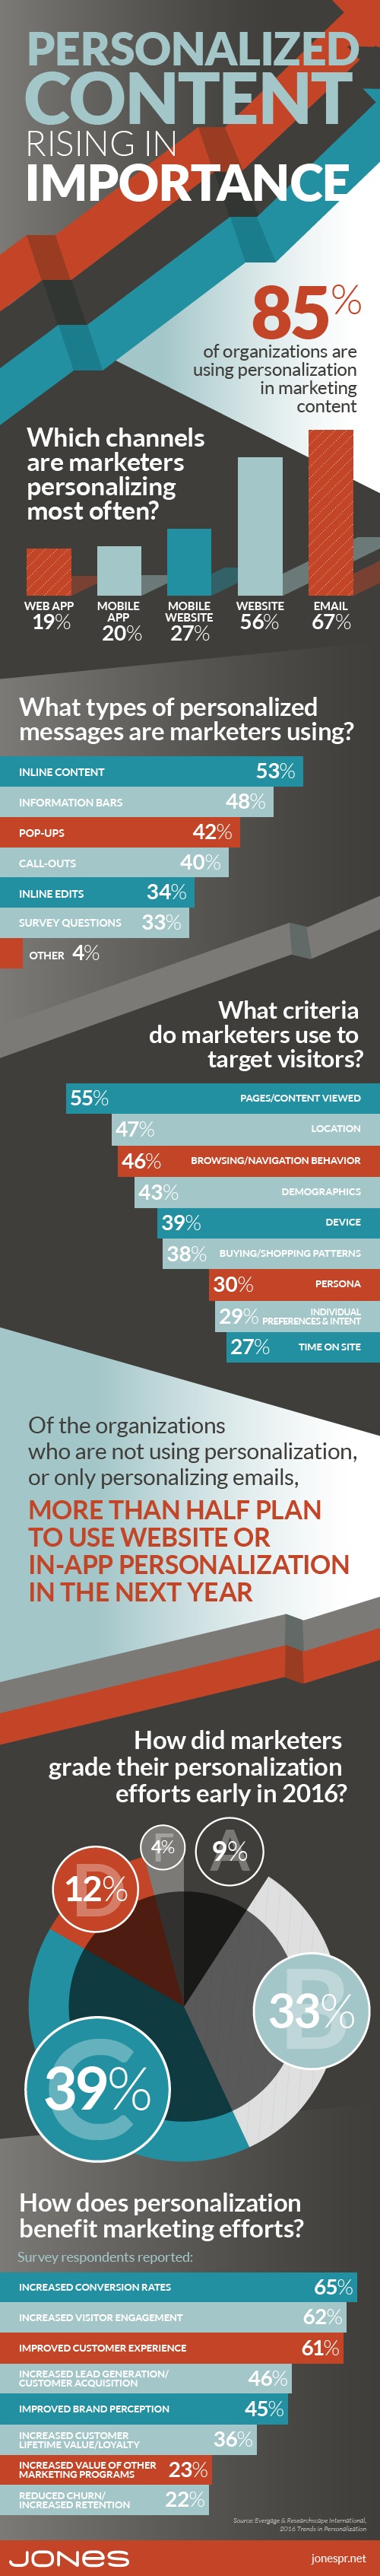 The Rising Importance of Personalized Content (infographic)